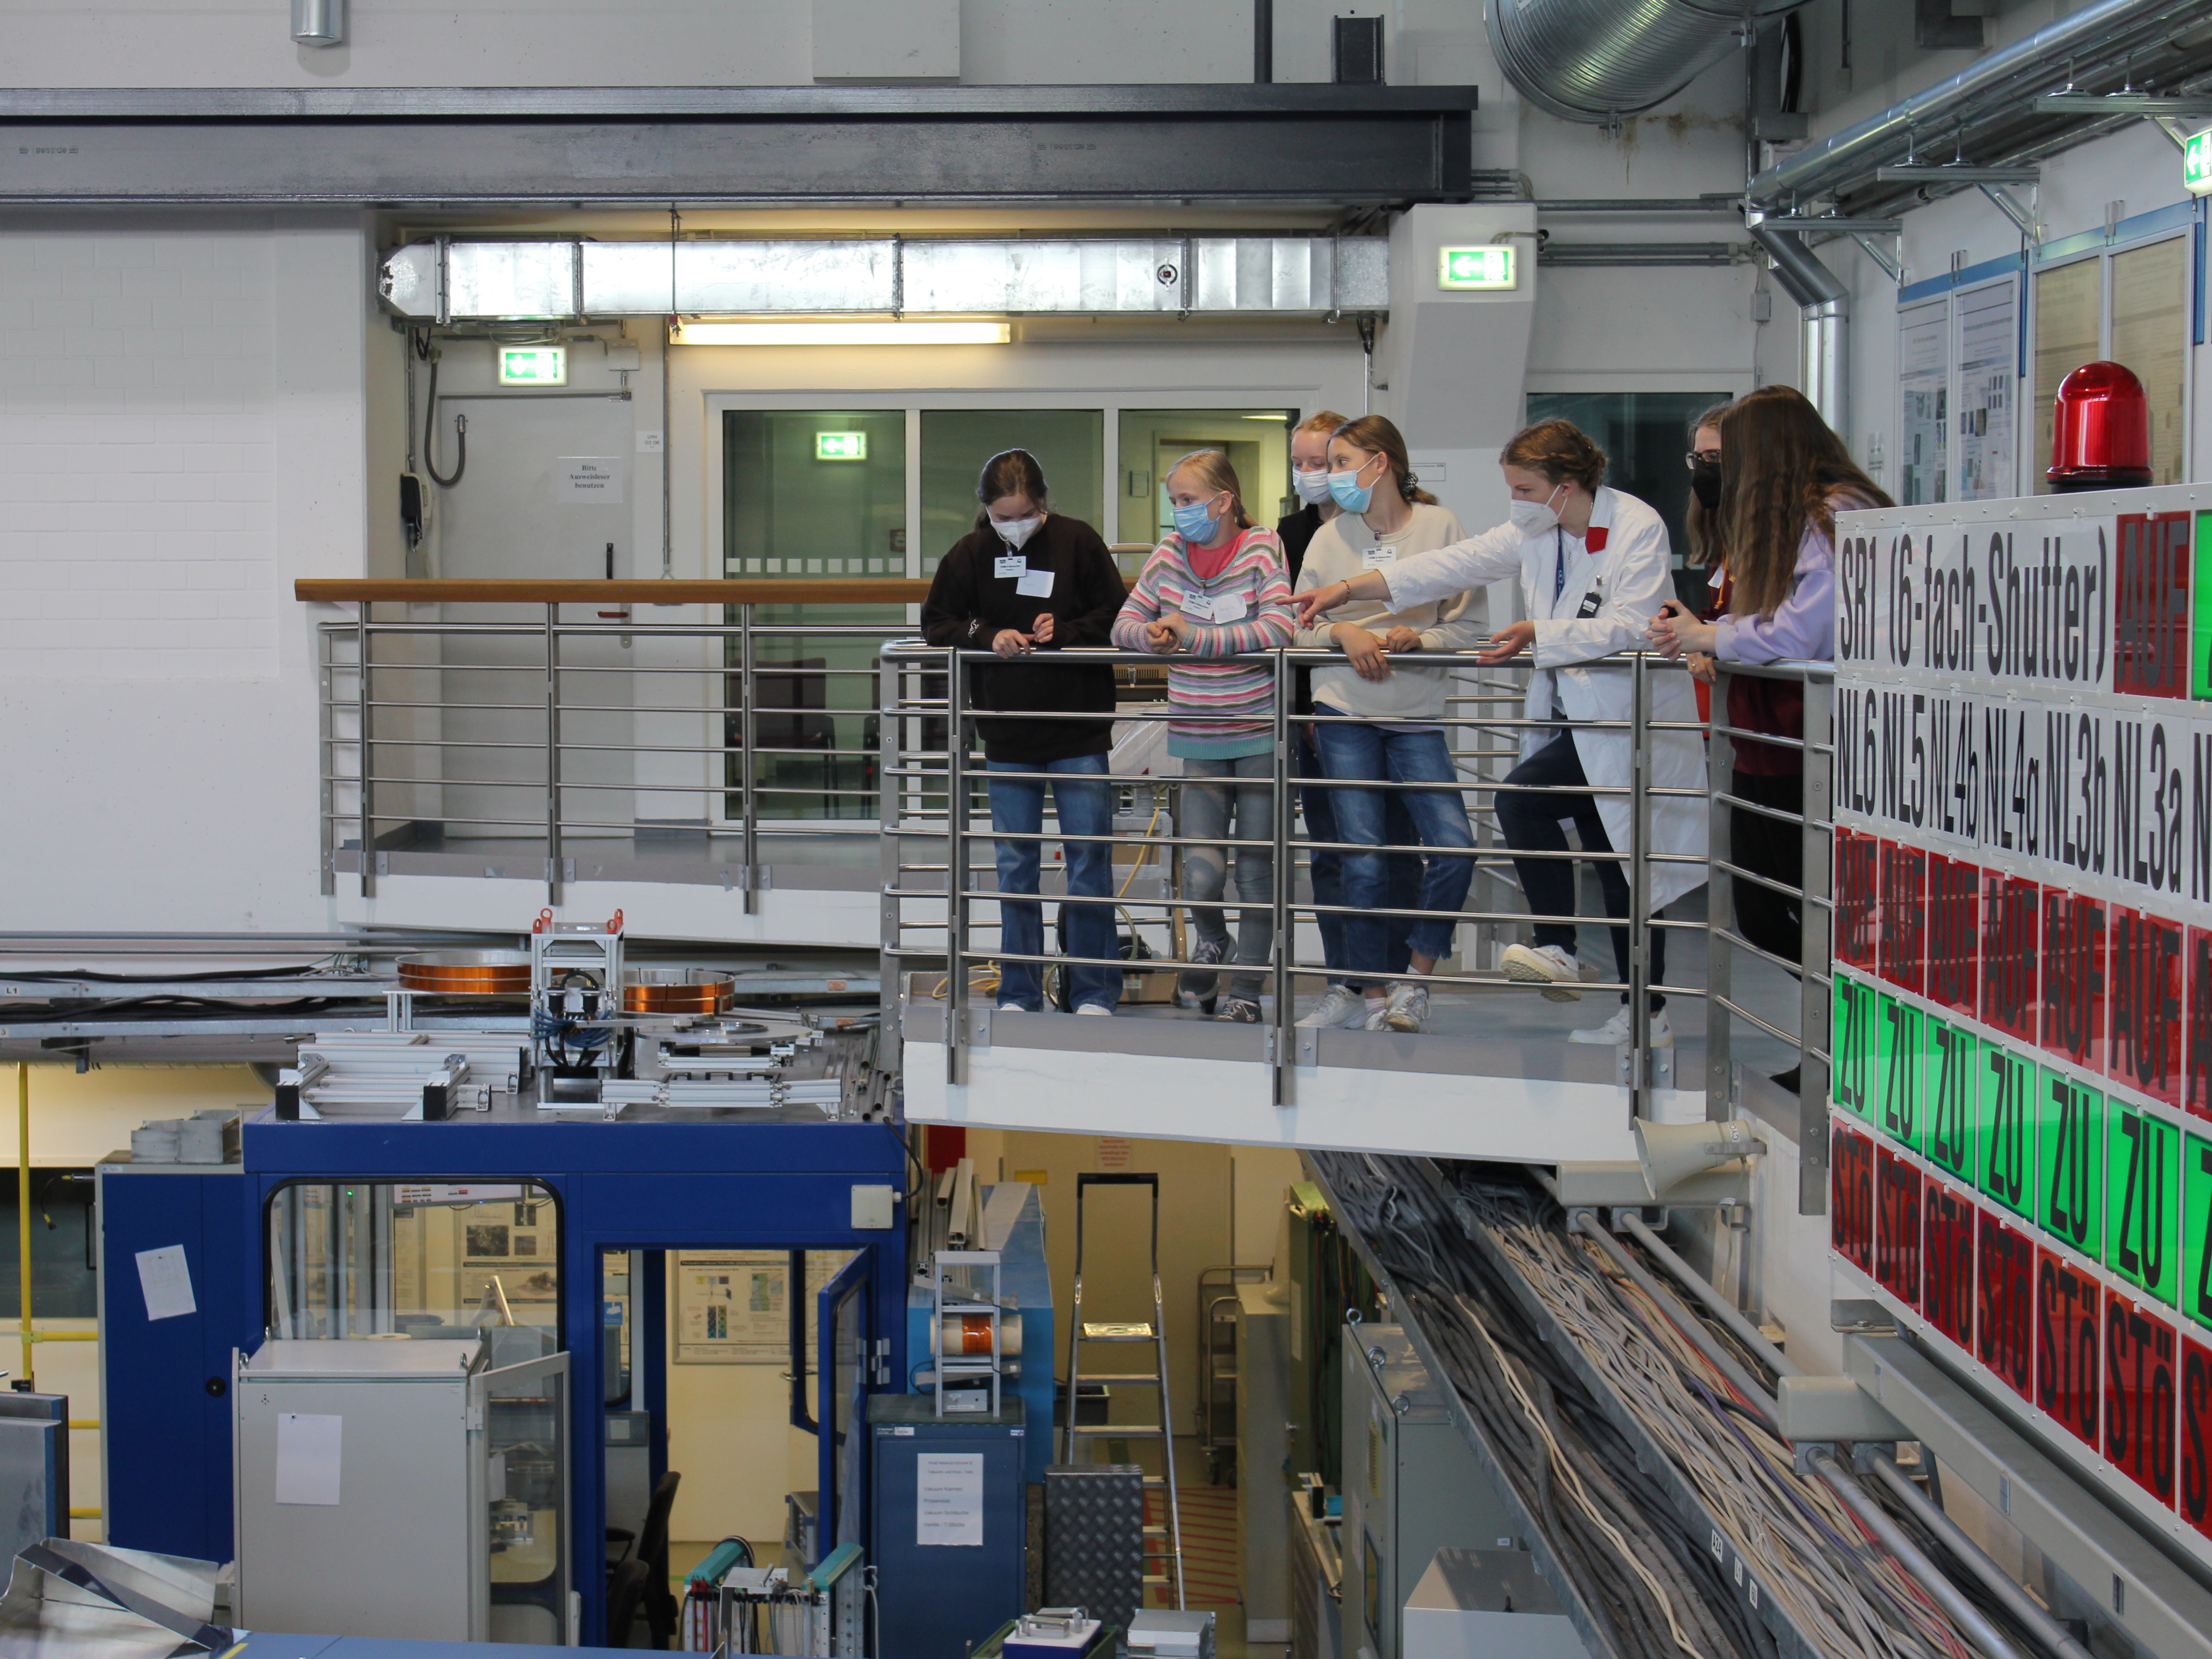 Hands-on science: Girls' Day at the research neutron source